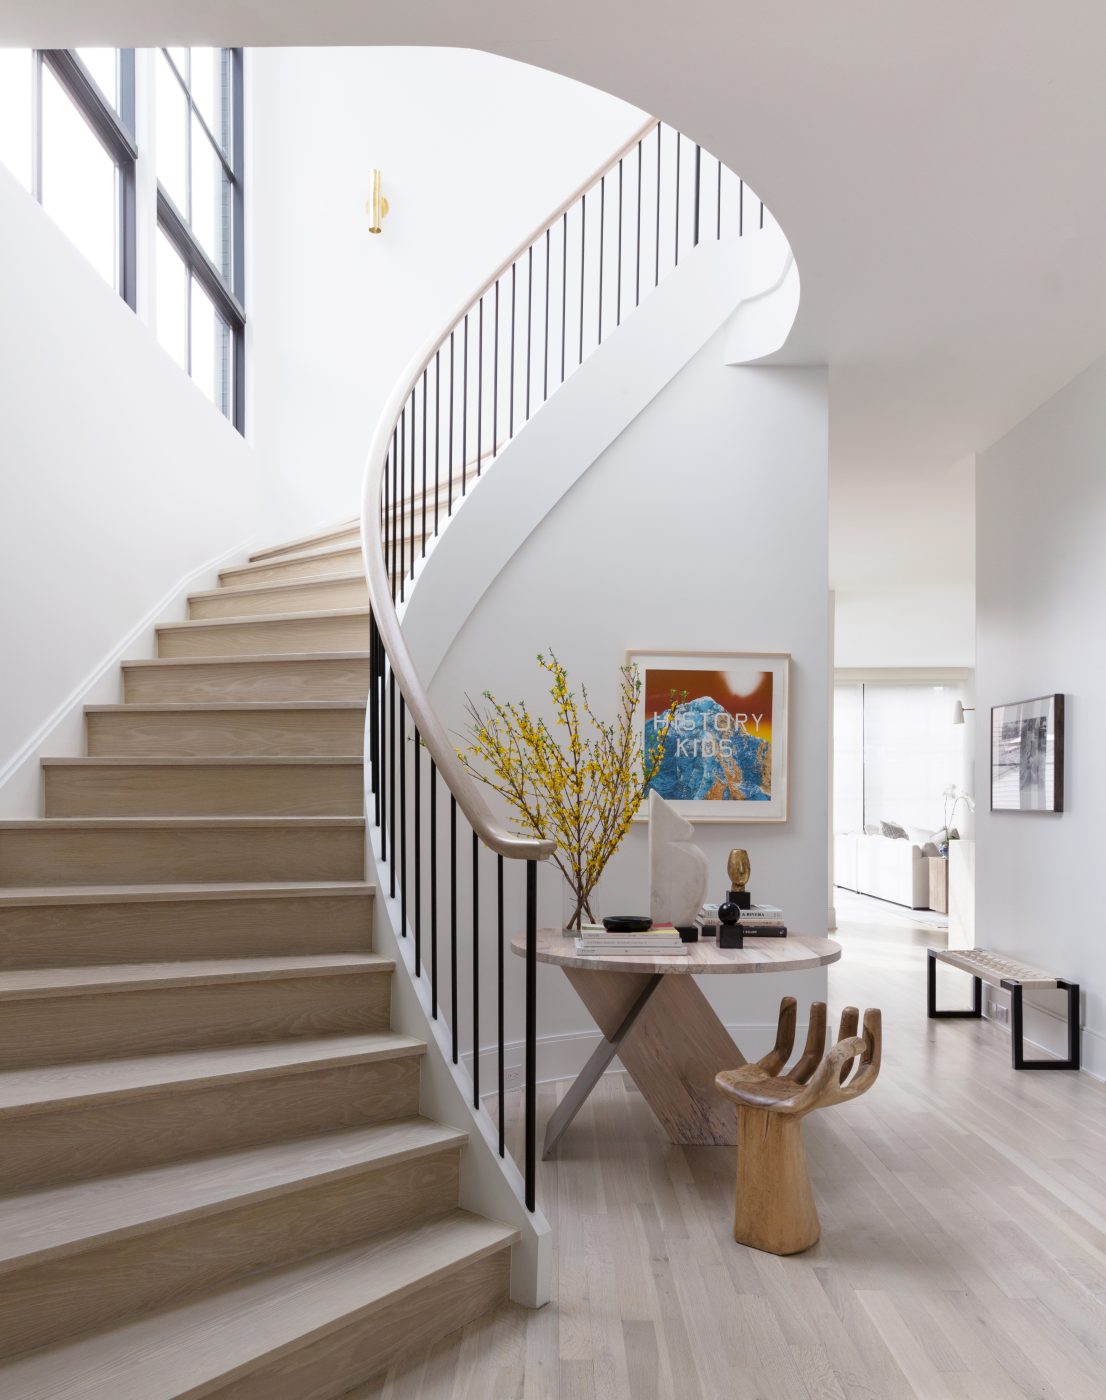 An elegant staircase designed by Summer Thornton